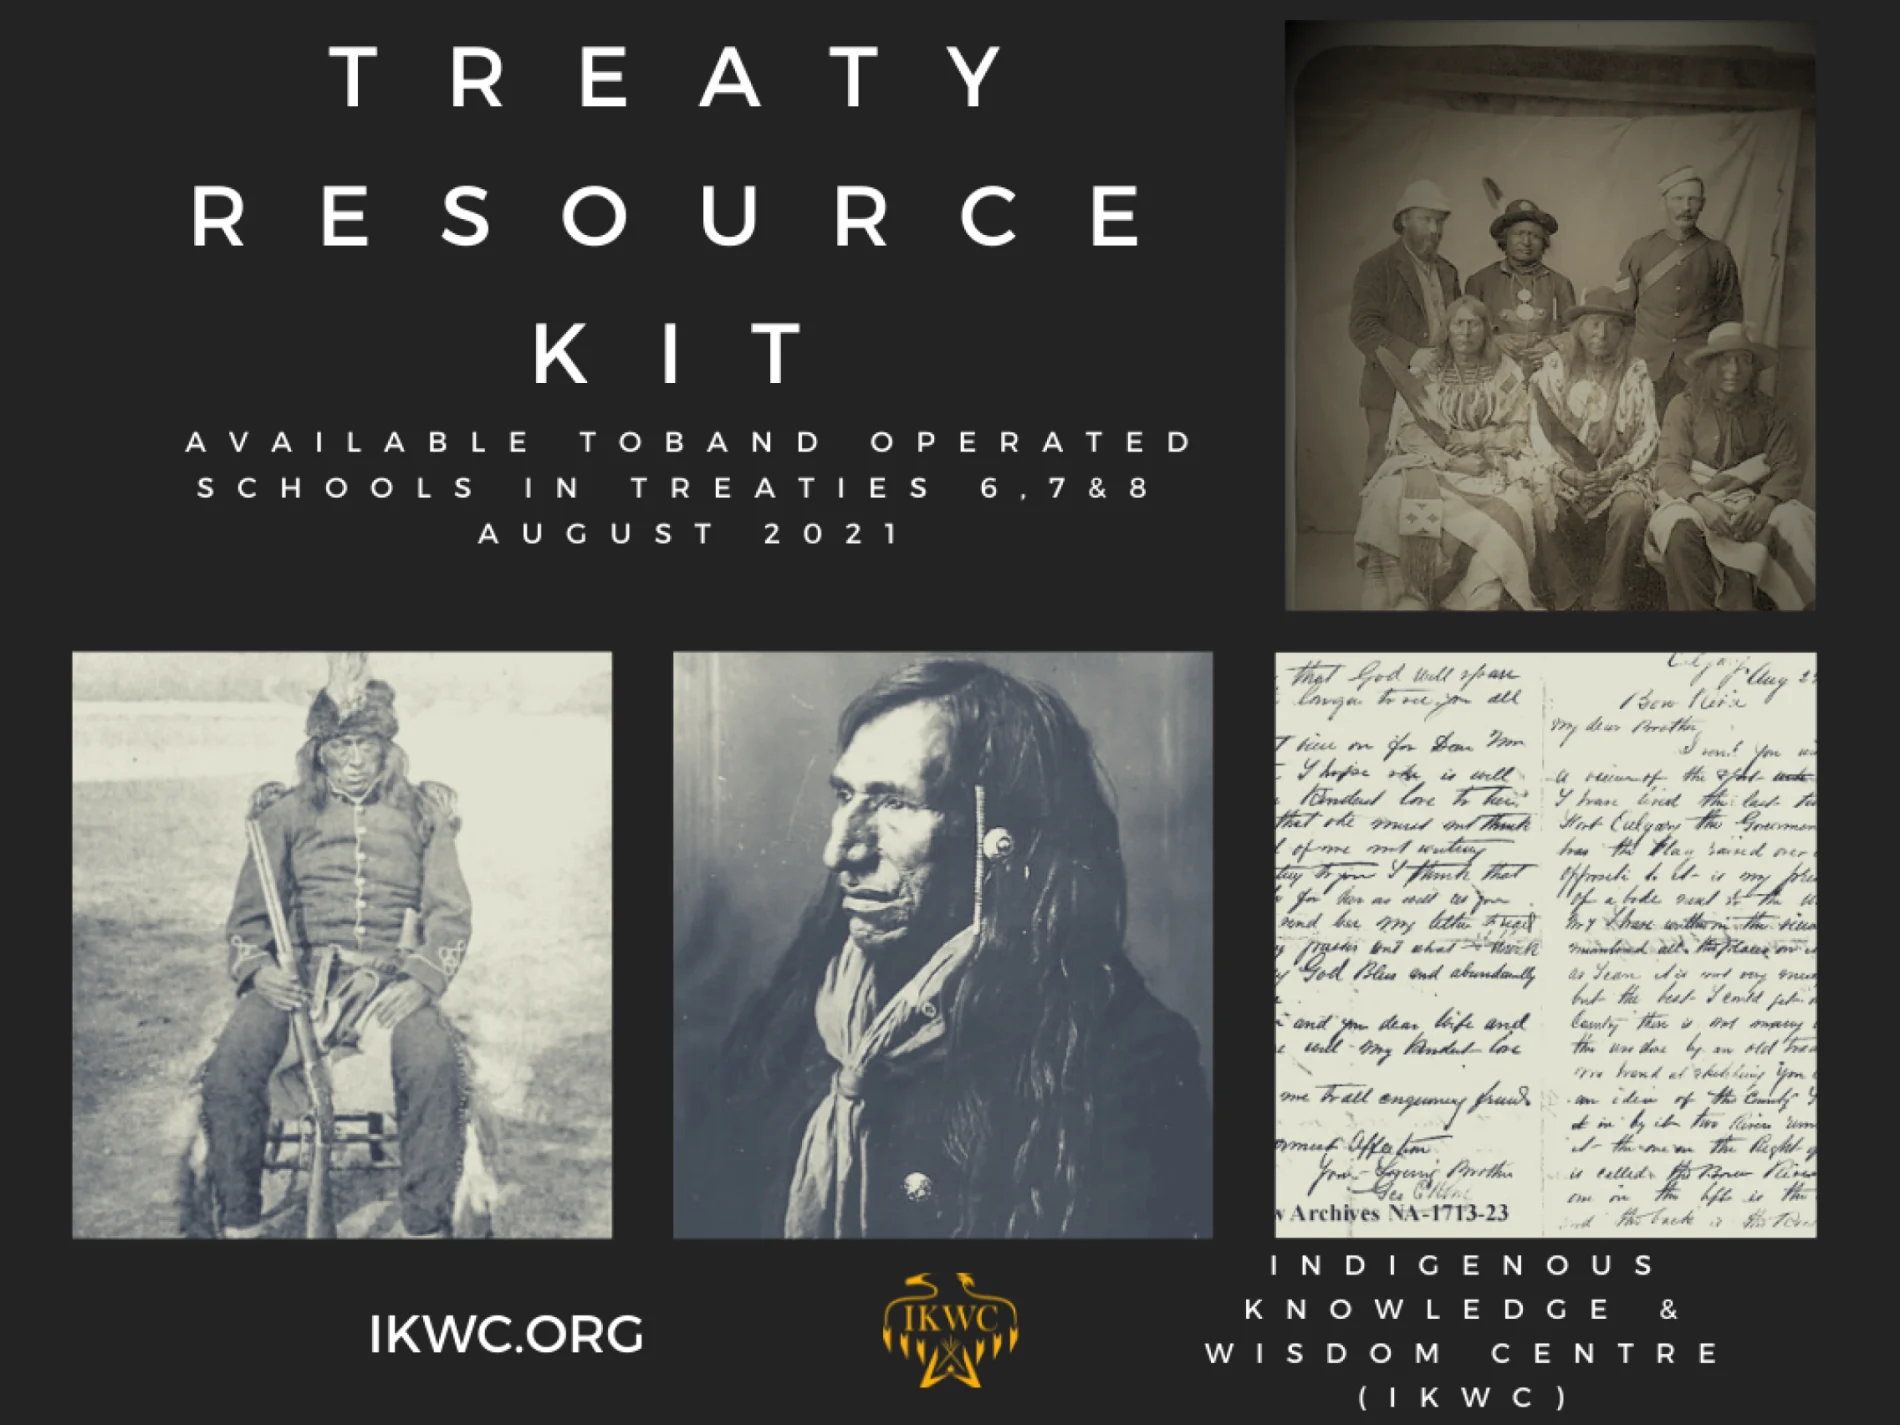 An Indigenous Knowledge and Wisdom Centre Treaty Resource Kit